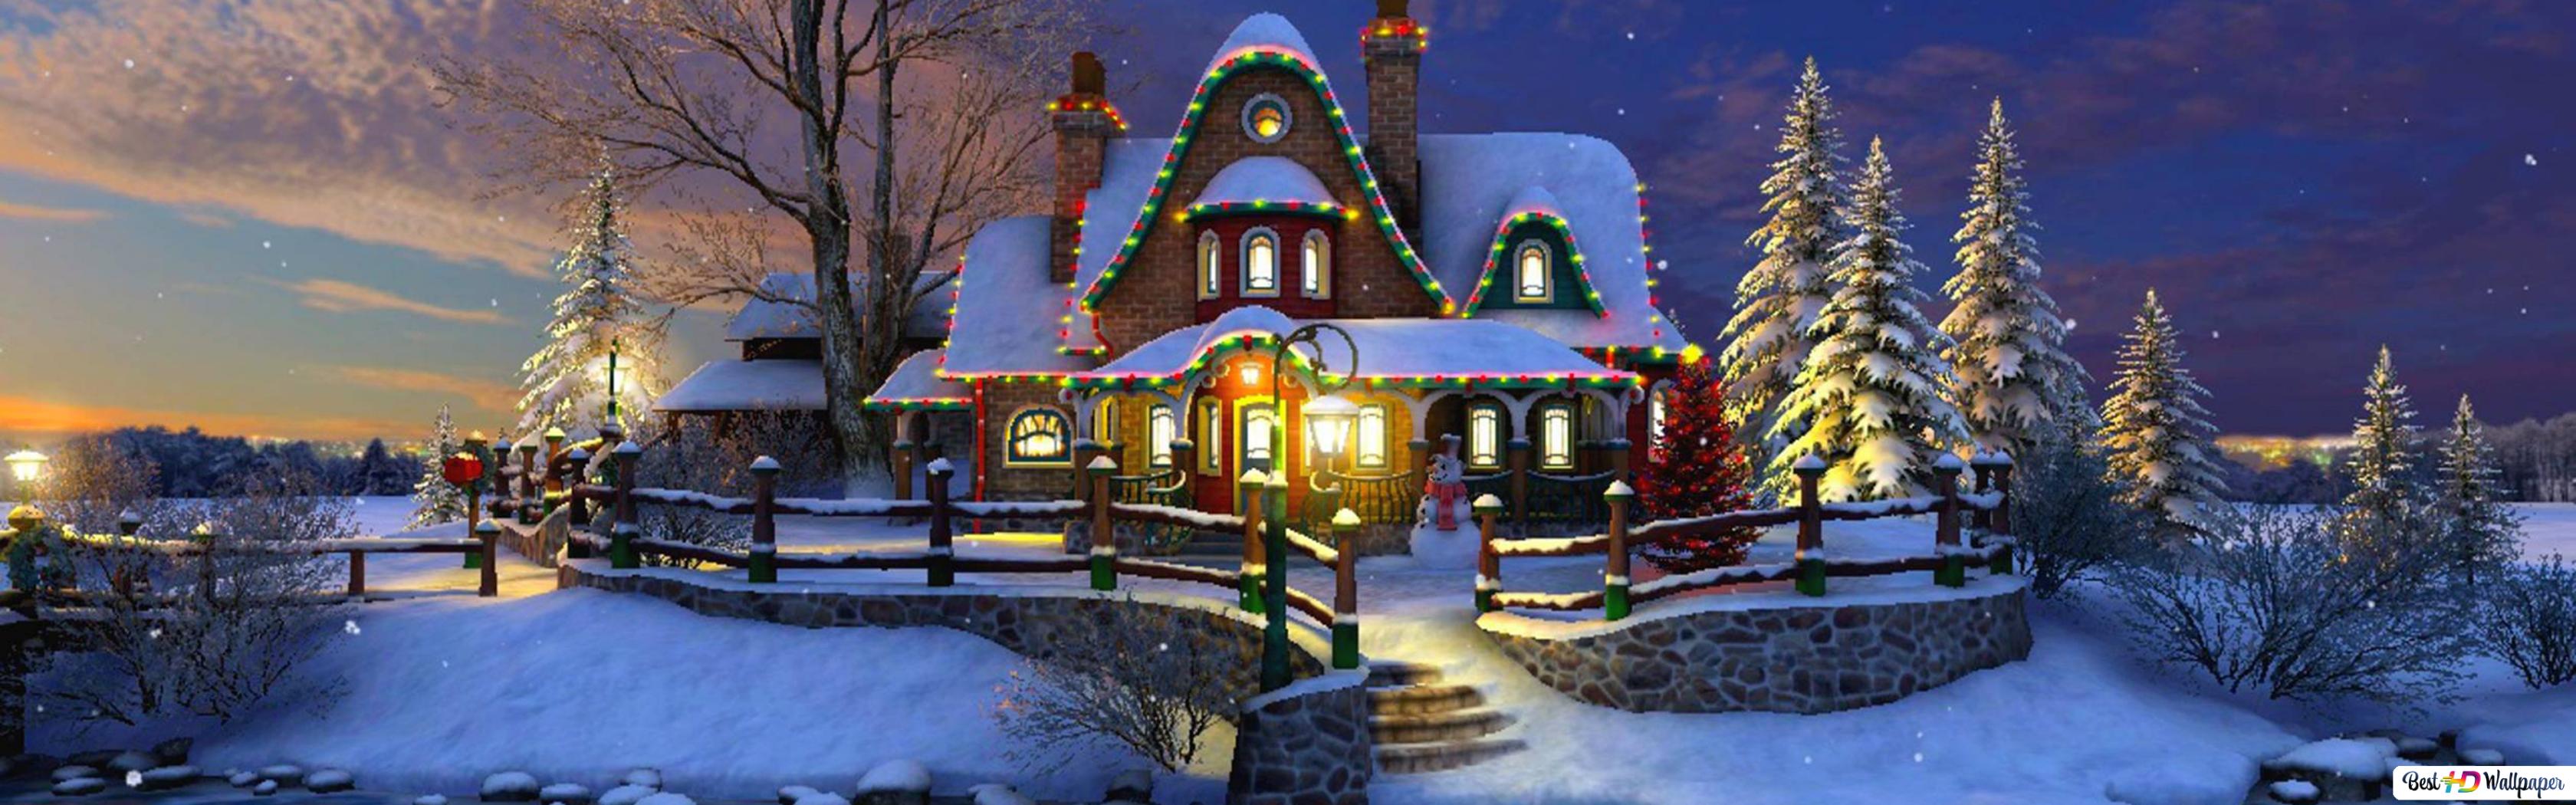 Christmas 3360x1050 Wallpapers - Wallpaper Cave